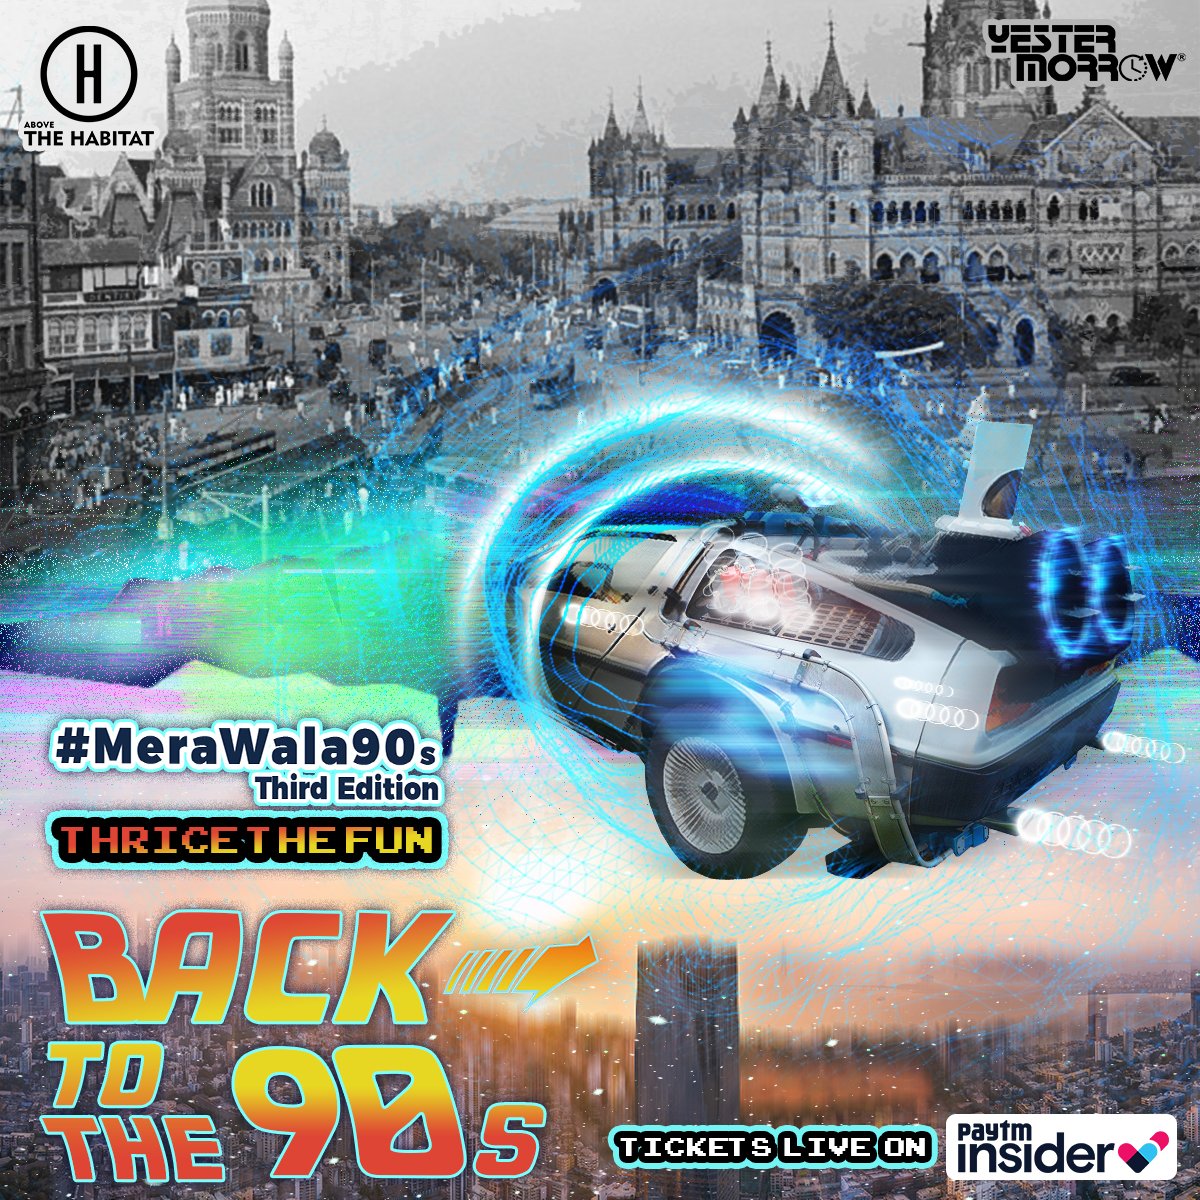 2019 will turn 1990 for a night! YES, the 90’s are back and that too in the most entertaining fashion. Join us for the epic ride on 21st December at The Habitat. 
#90sevent #90slife #90nostalagia #relivethe90s #imissthe90s #Insta90s #Poetsofmumbai #comedynights #mumbaisingers